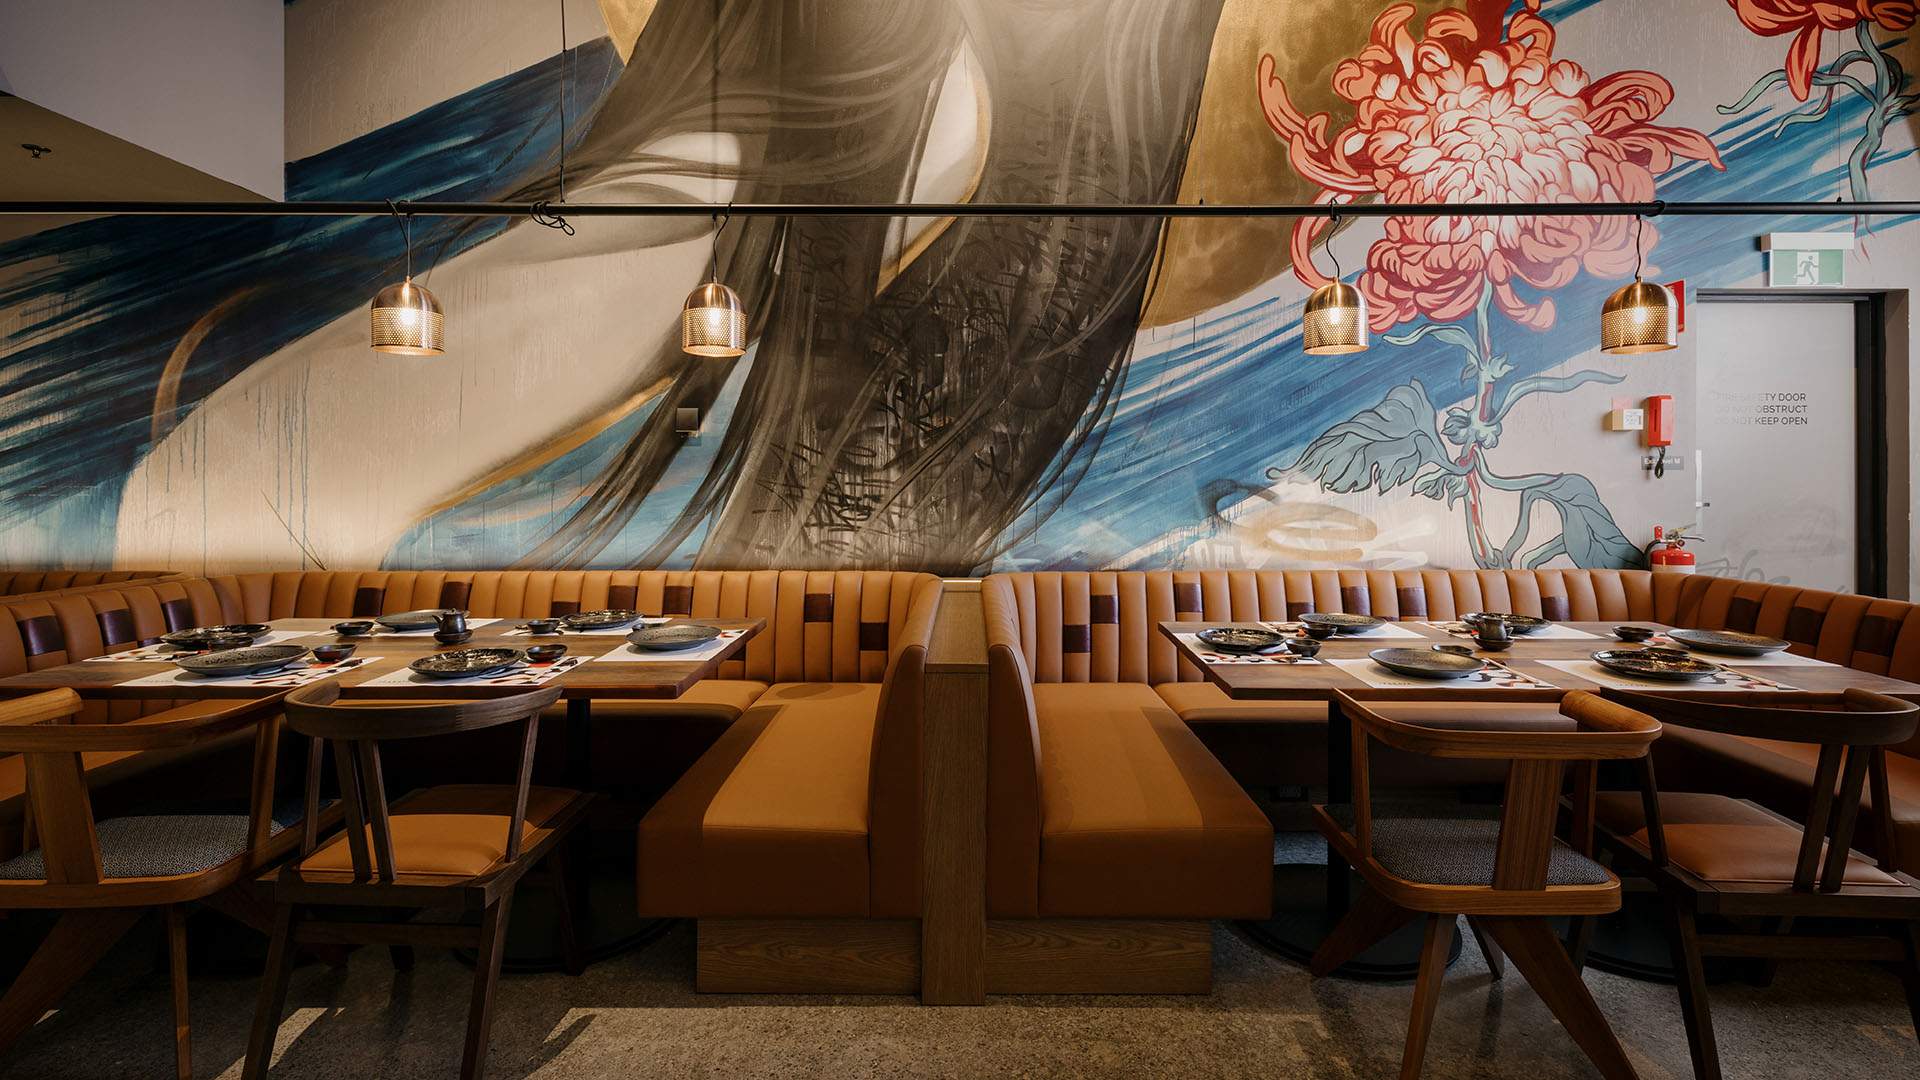 Brisbane's First Hotel Indigo Boasts a Japanese Eatery and 'Boy Swallows Universe'-Inspired Mural